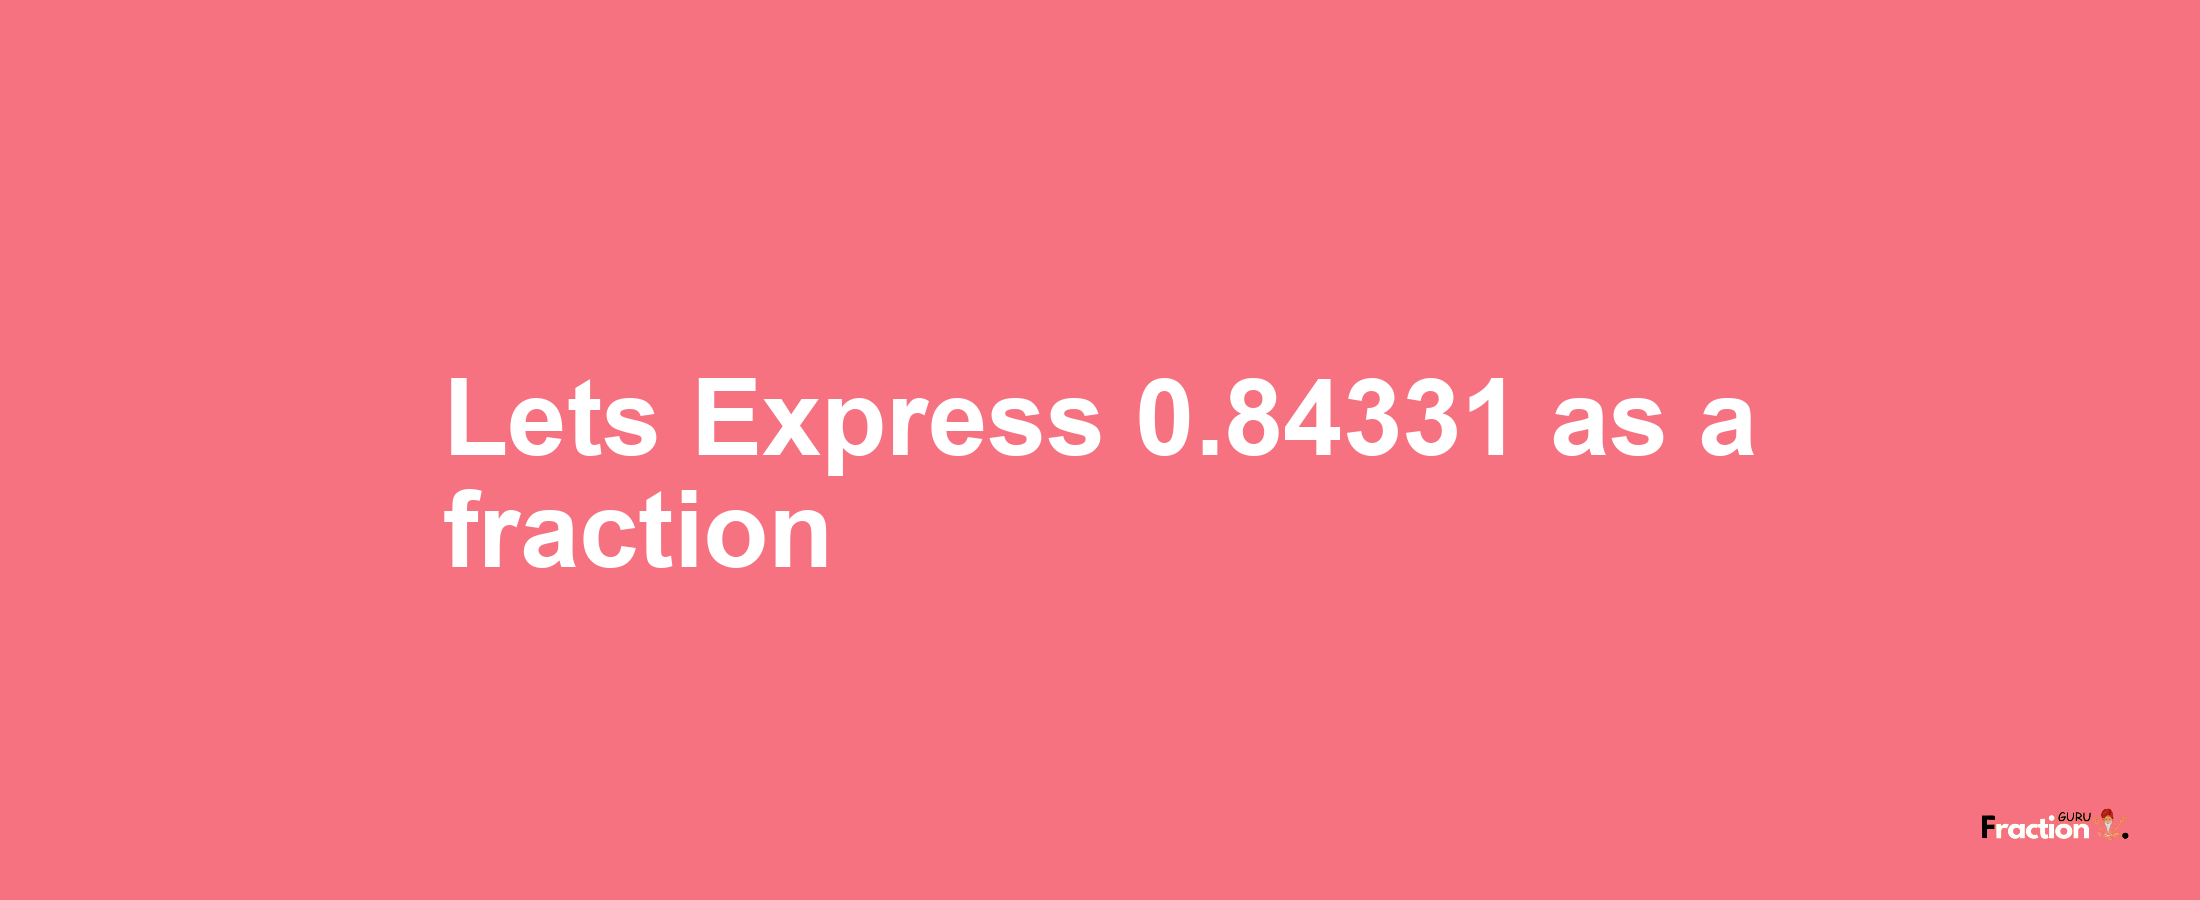 Lets Express 0.84331 as afraction